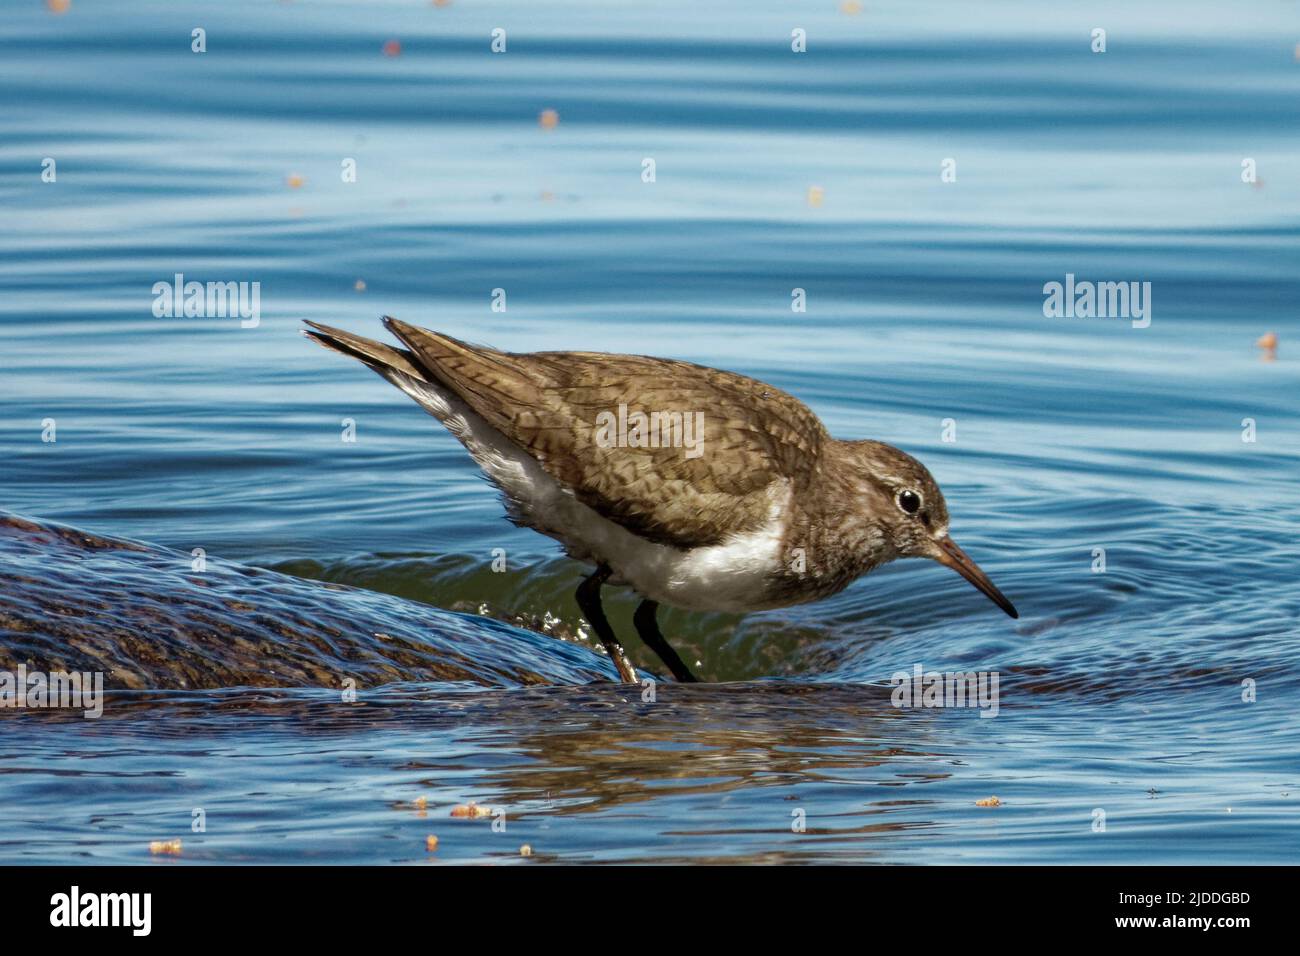 Common sandpiper (Actitis hypoleucos) is a small Palearctic wader. Stock Photo